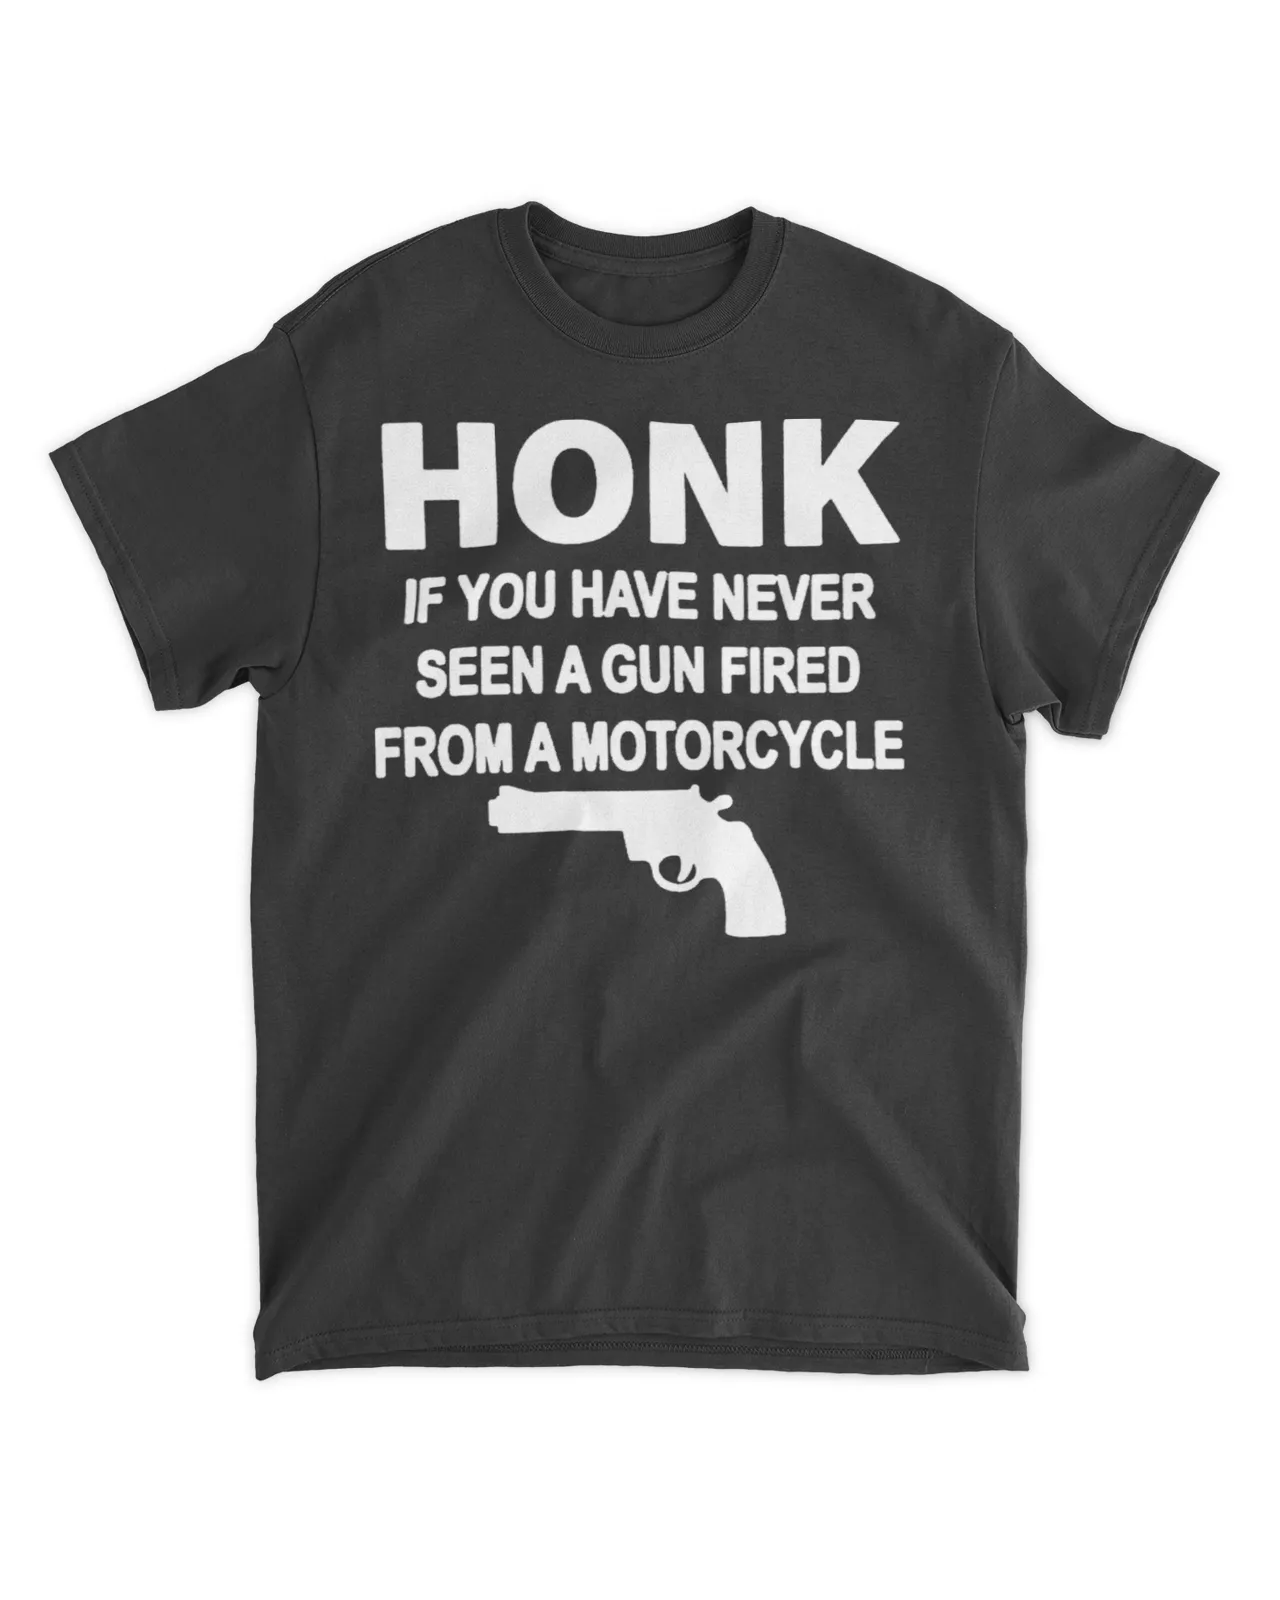  Honk if you have never seen a gun fired from a motocycle shirt